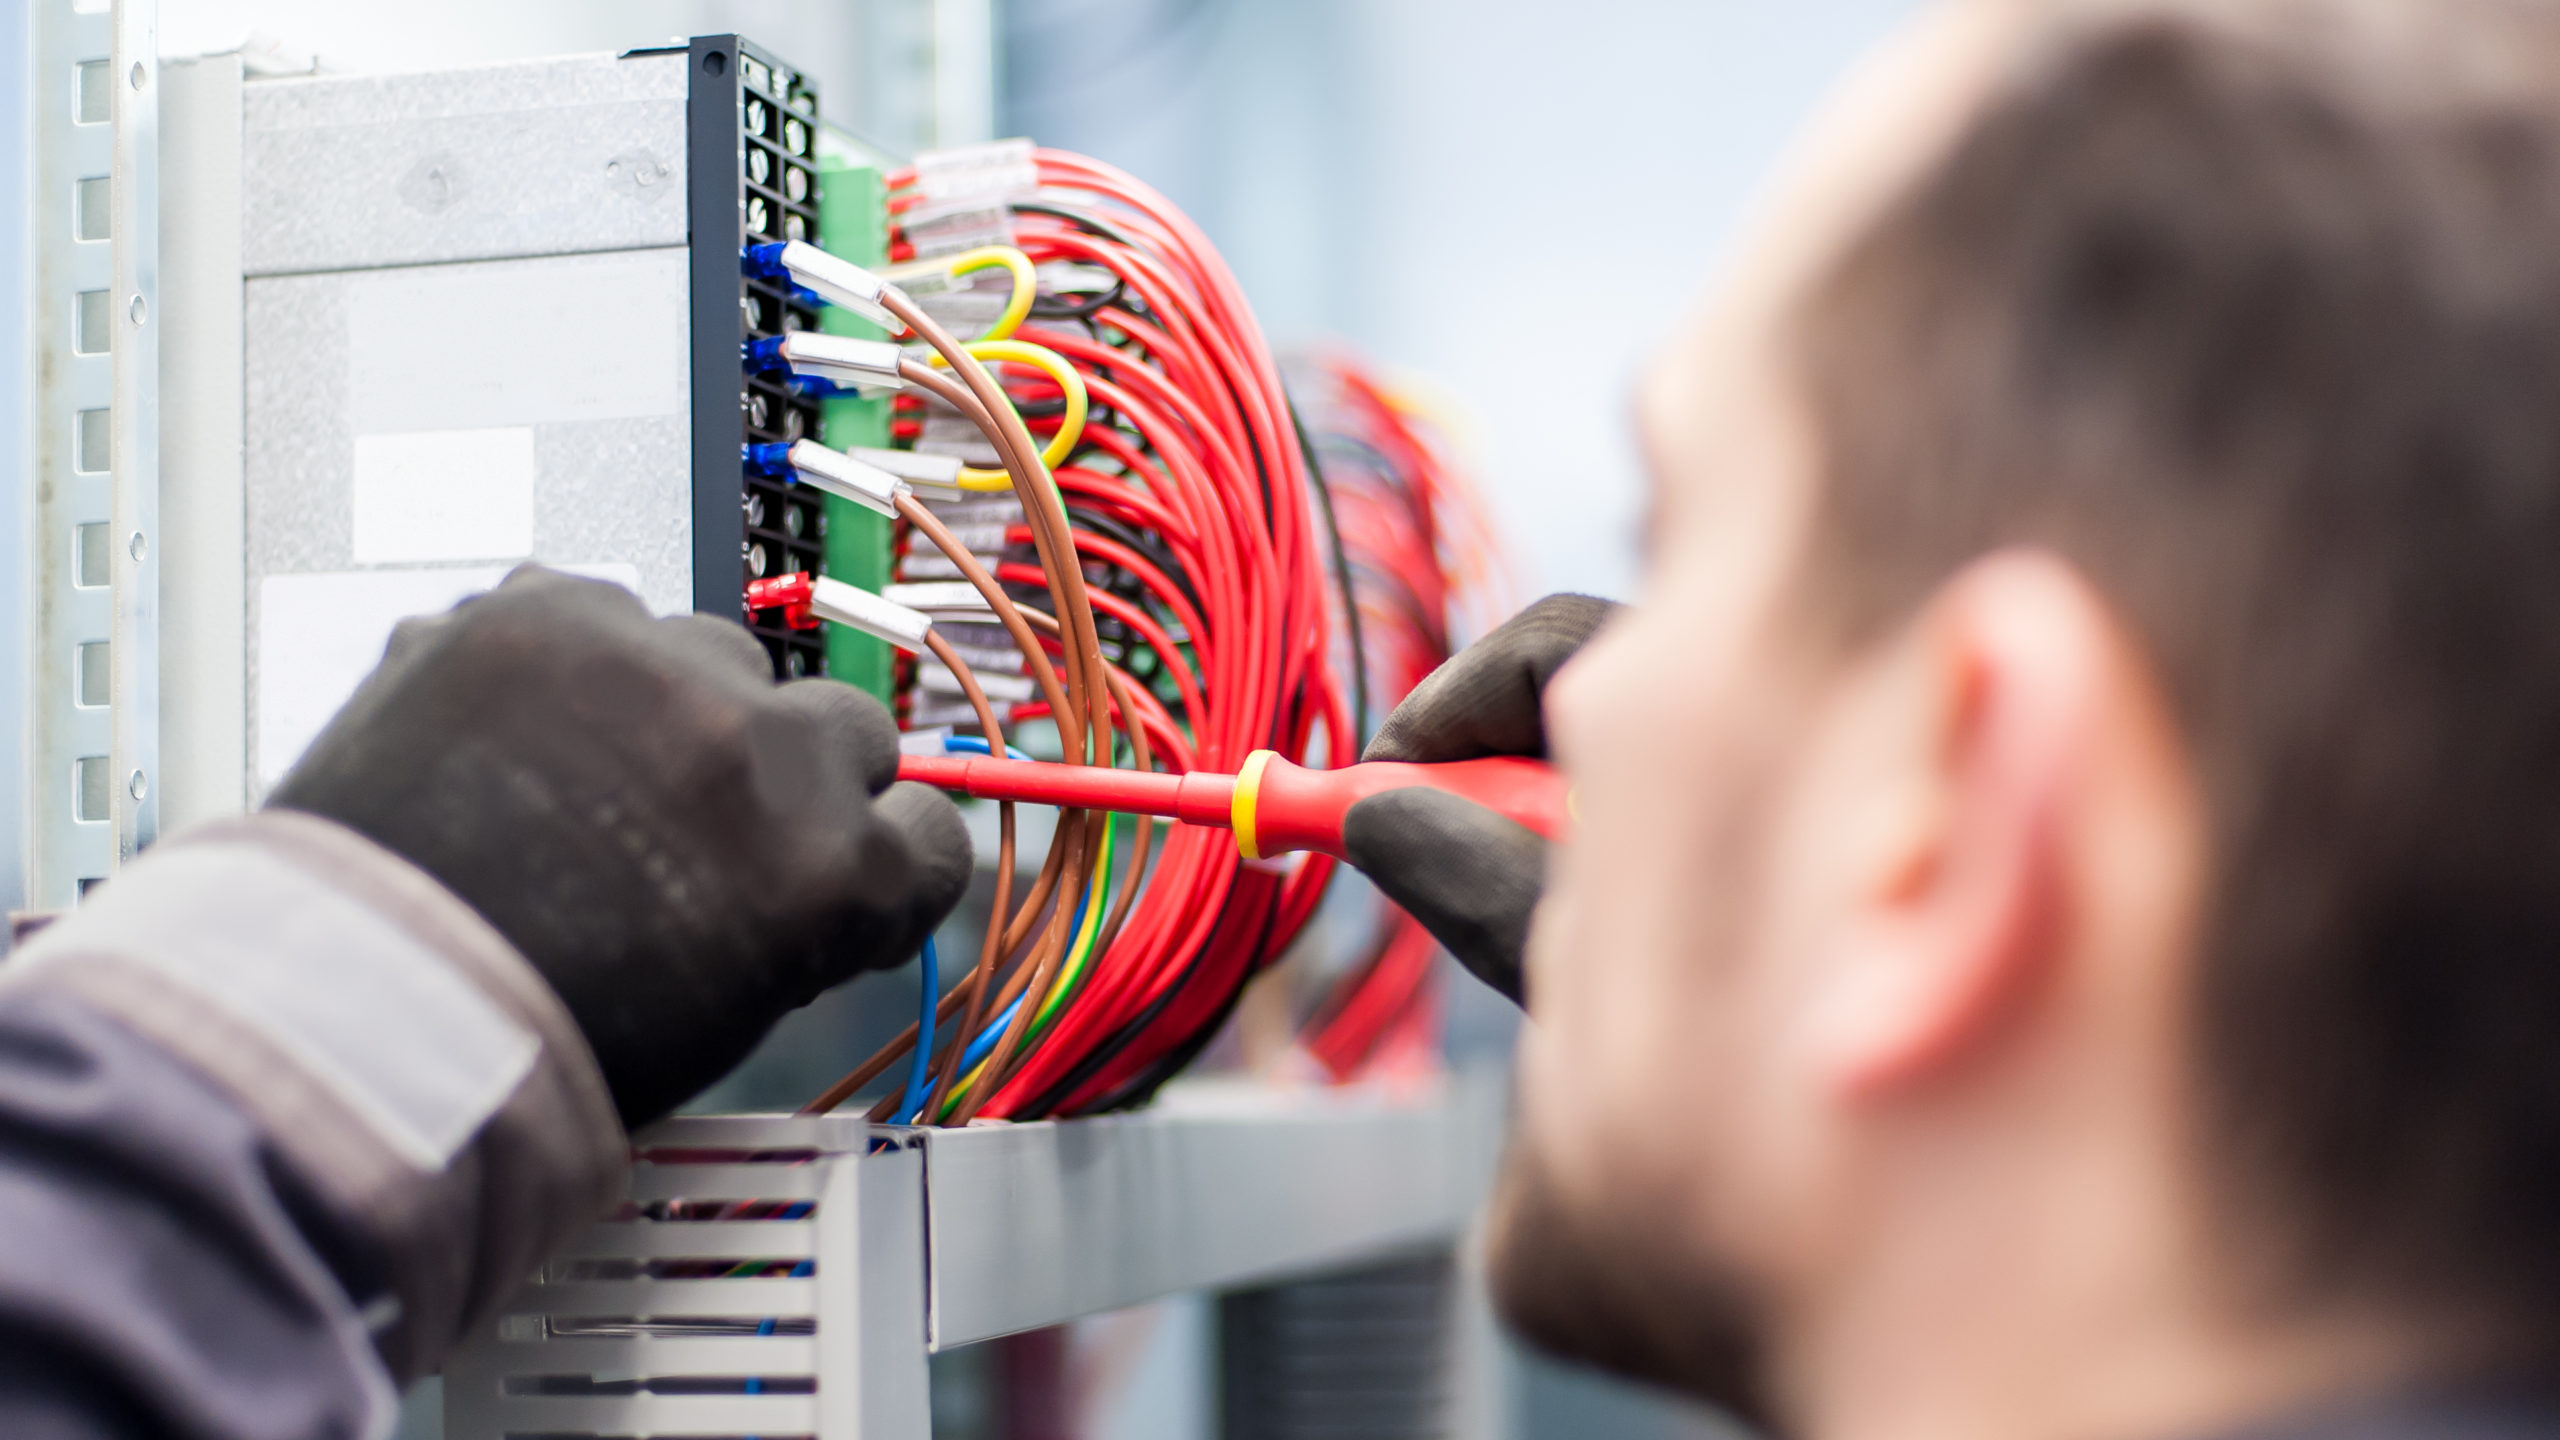 Basic Electricity Knowledge Your New Employees Should Have